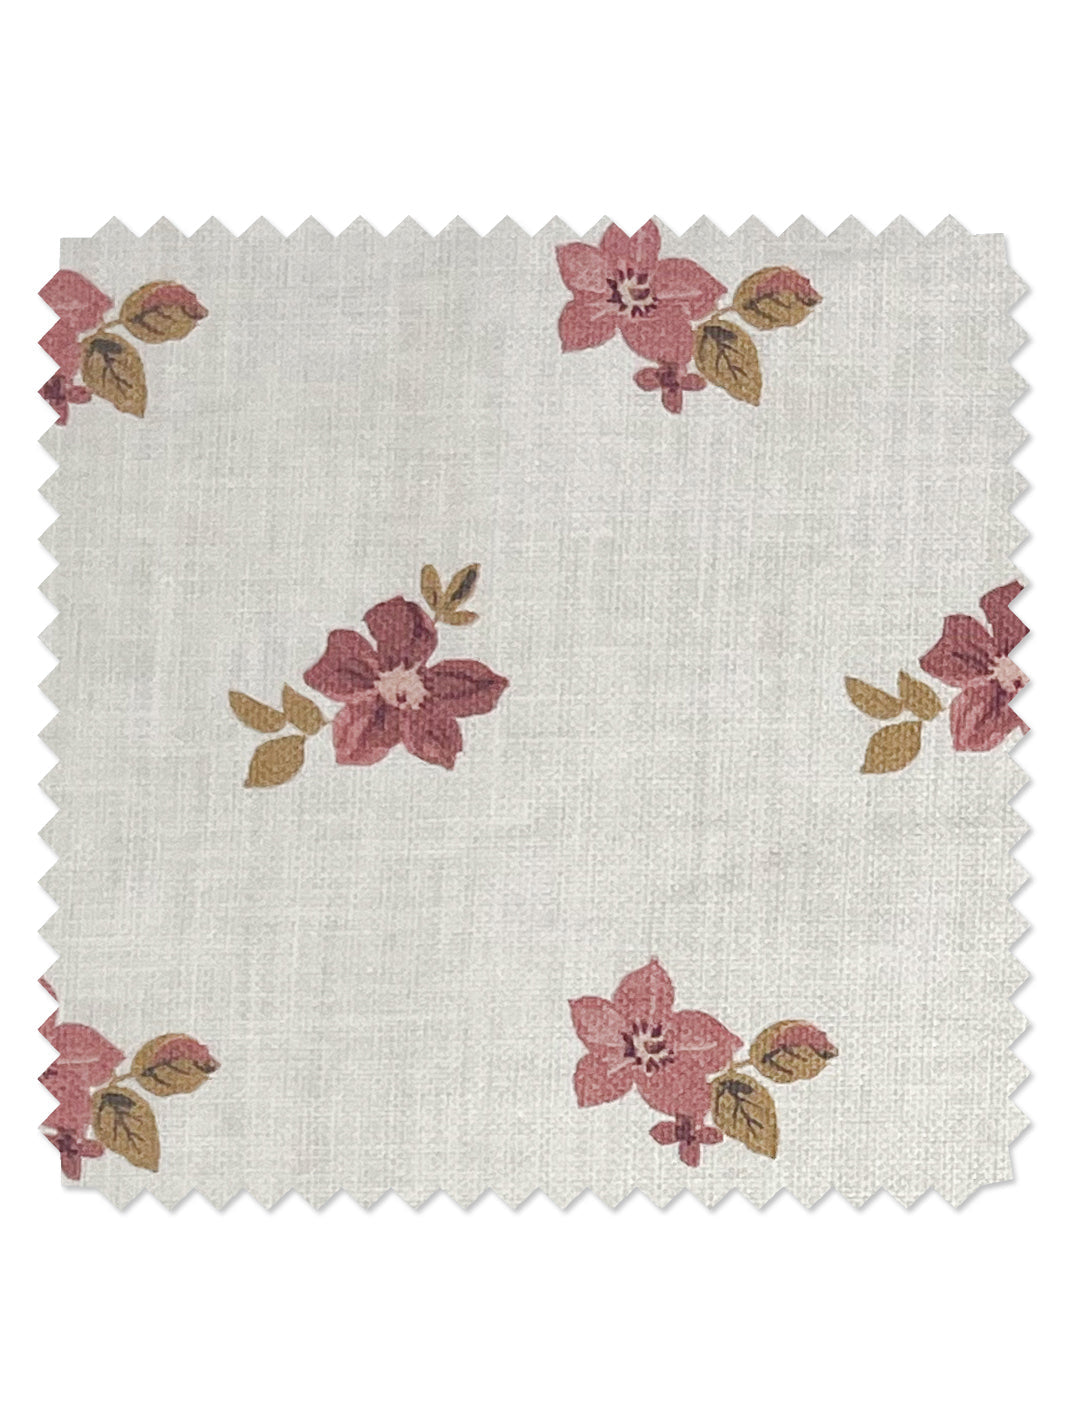 'Anna Floral' Linen Fabric by Nathan Turner - Mustard Pink